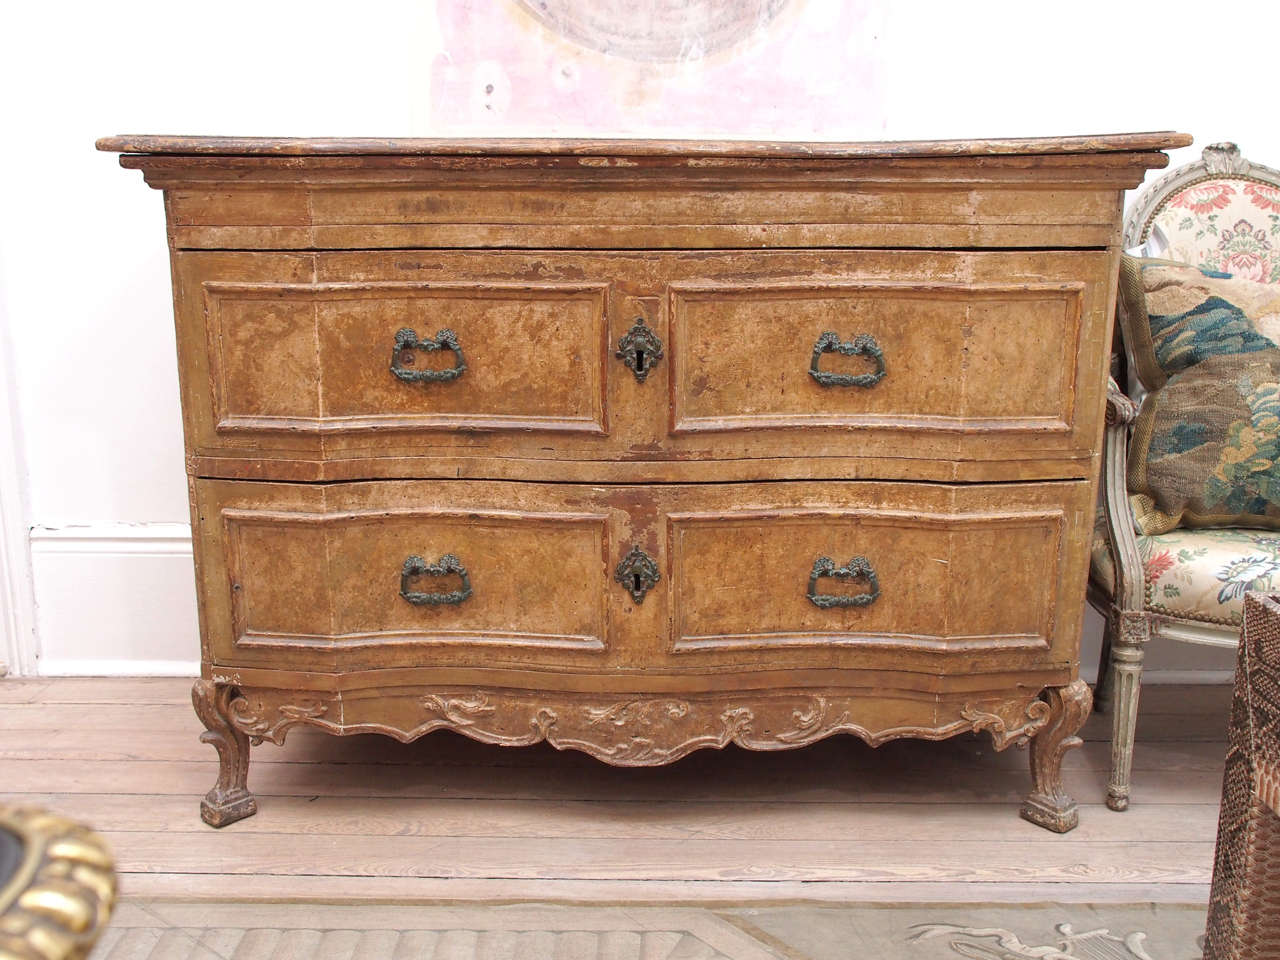 This wooden commode was made during the 18th century in France.  The wood has lots of marks on it, especially the top of it.  The knicks and marks add to its charm and reveal its authenticity.